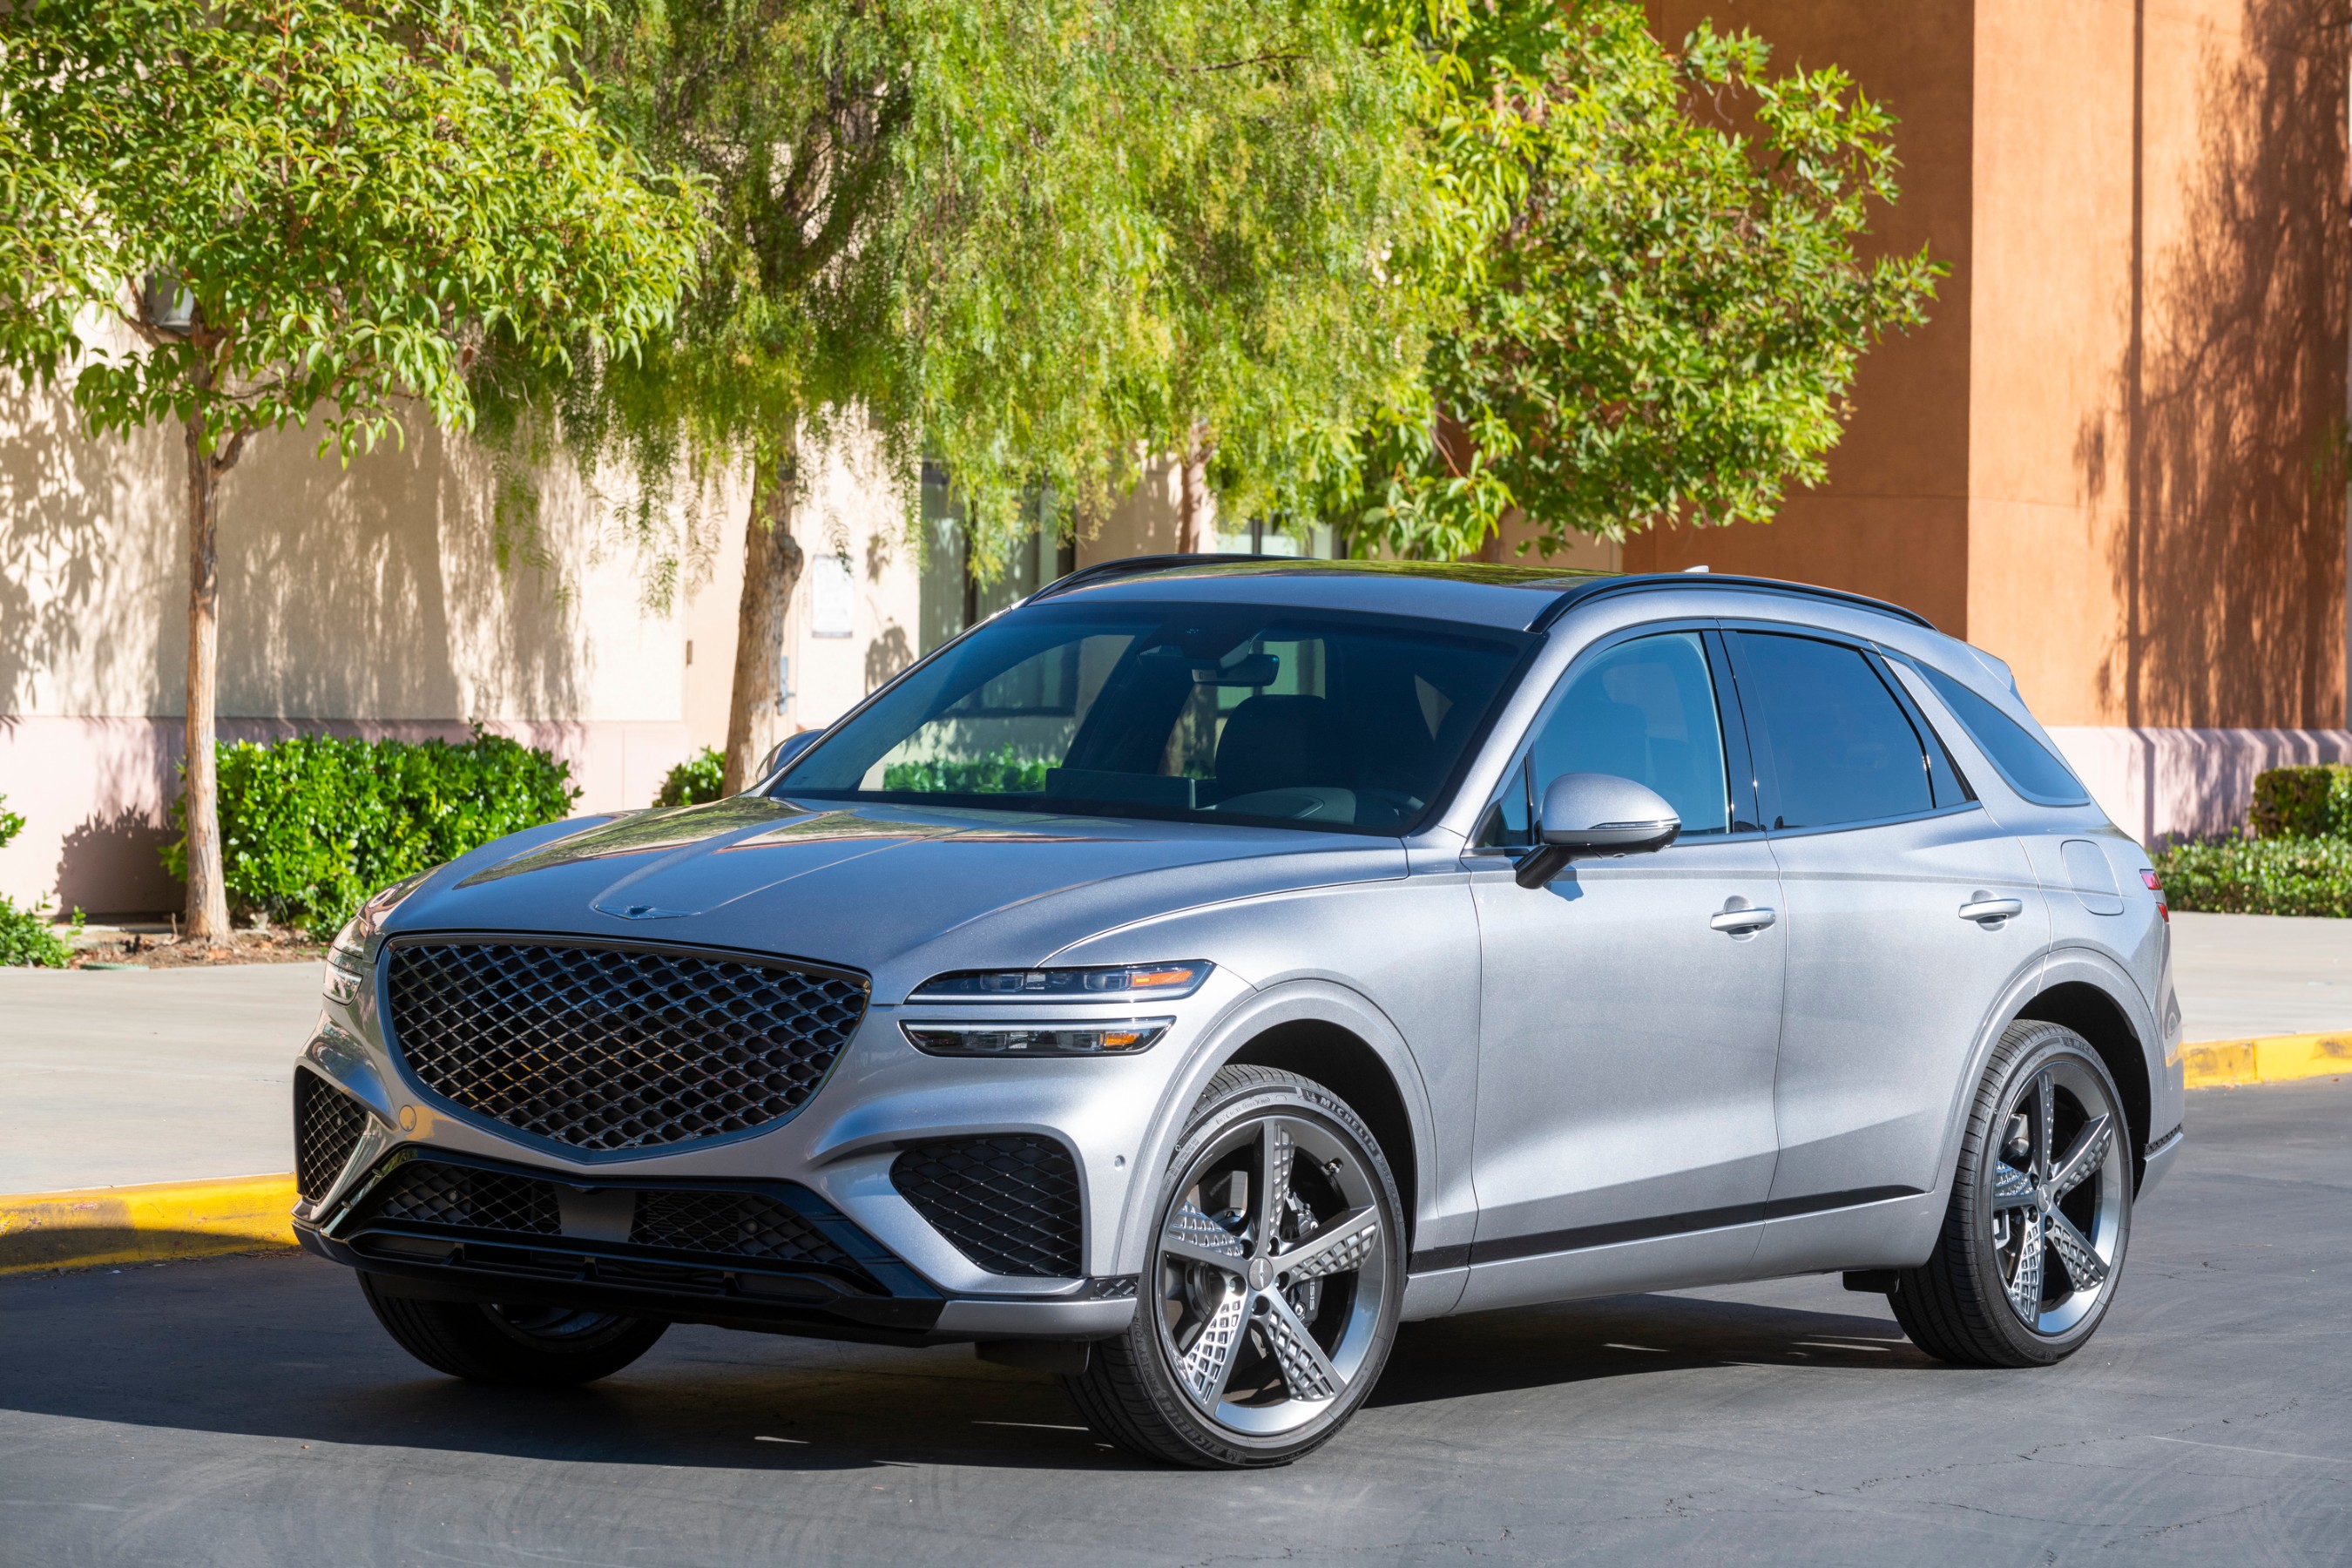 The 2022 Genesis GV70 packs a lot of value into a stylish and sporty package, loaded with technology and safety features, plus an excellent warranty. It’s no wonder the GV70 has claimed the title of the Best Buy Compact Luxury SUV of 2022.